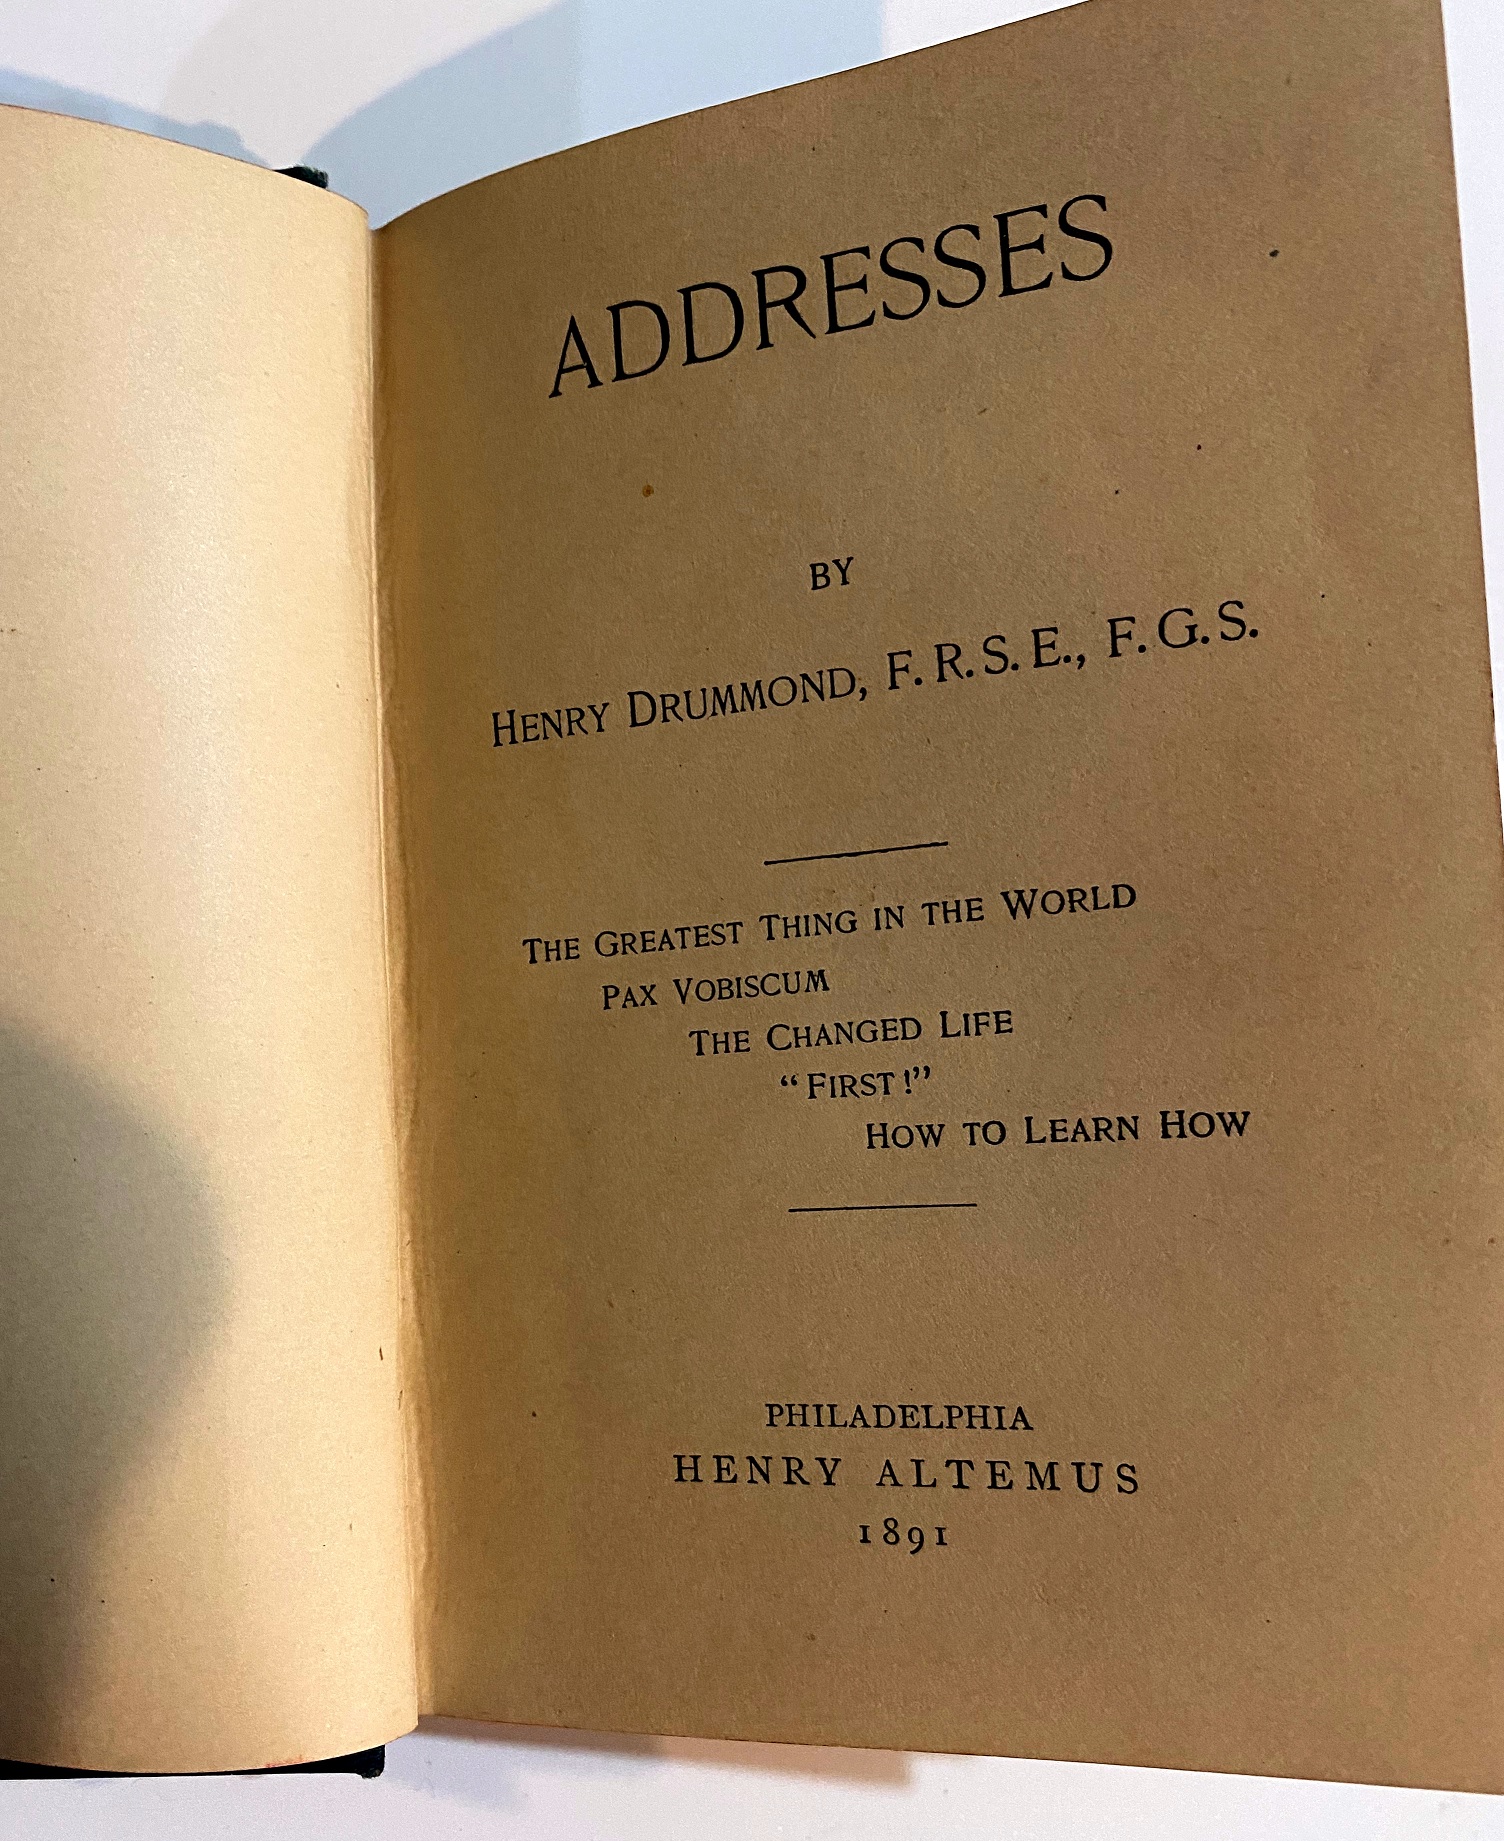 Discover the Timeless Wisdom of Henry Drummond's First Edition Book | The Greatest Thing In The World.